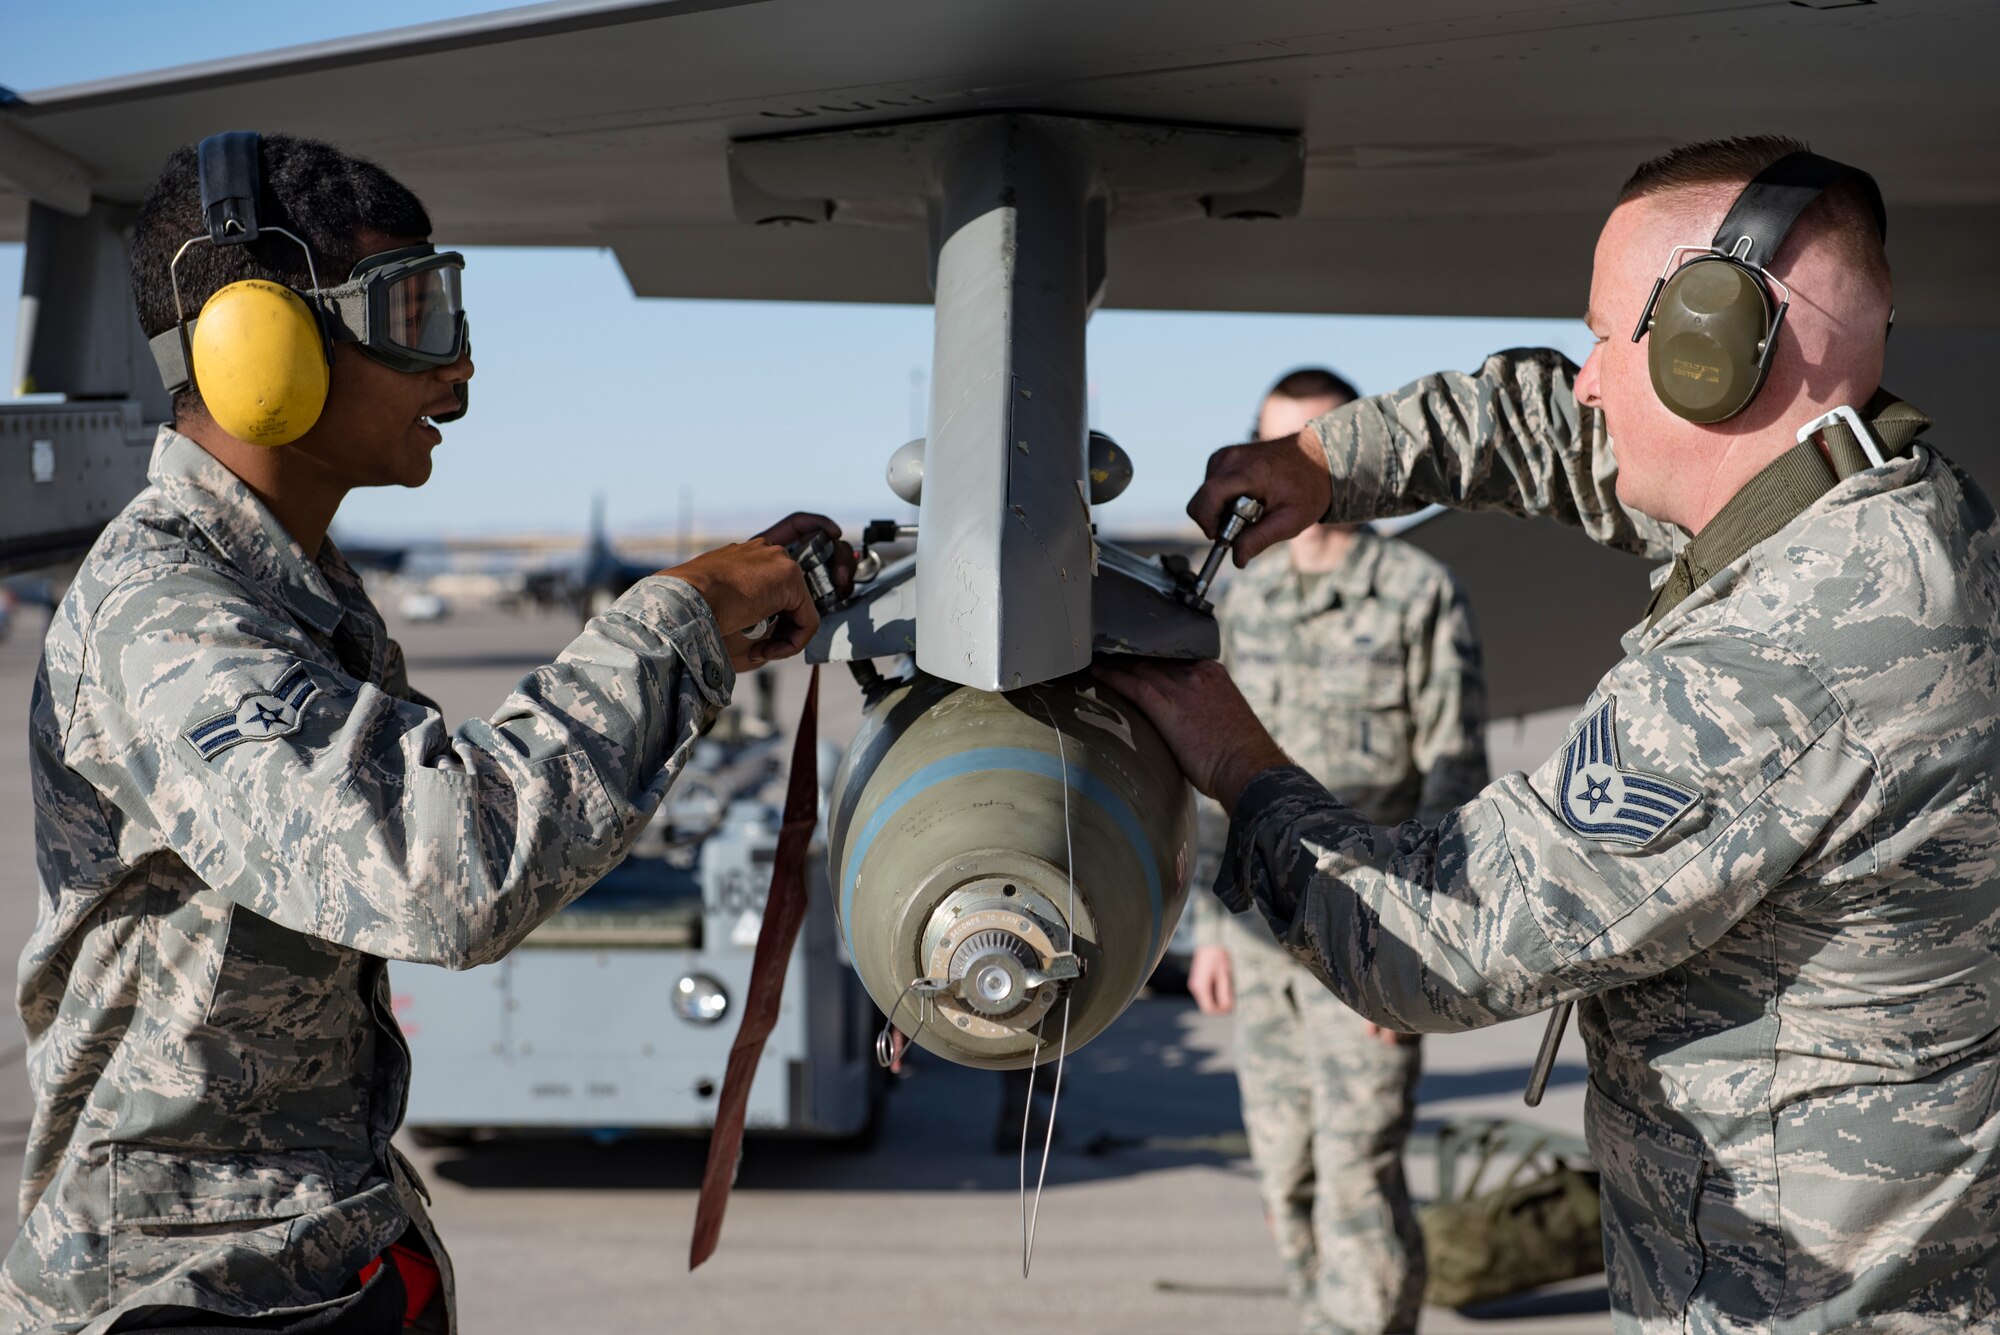 Airman 1st Class Geoffrey Saunders and Staff Sgt. Shawn White, 57th Aircraft Maintenance Squadron weapons loaders, load a bomb onto an F-16 Fighting Falcon fighter jet during a load crew competition at Nellis Air Force Base, Nevada, April 13, 2018. Load crew competitions provide weapons loaders throughout the 57th MXG the opportunity to display their weapons loading skills to their peers and superiors.(U.S. Air Force photo by Airman 1st Class Andrew D. Sarver)